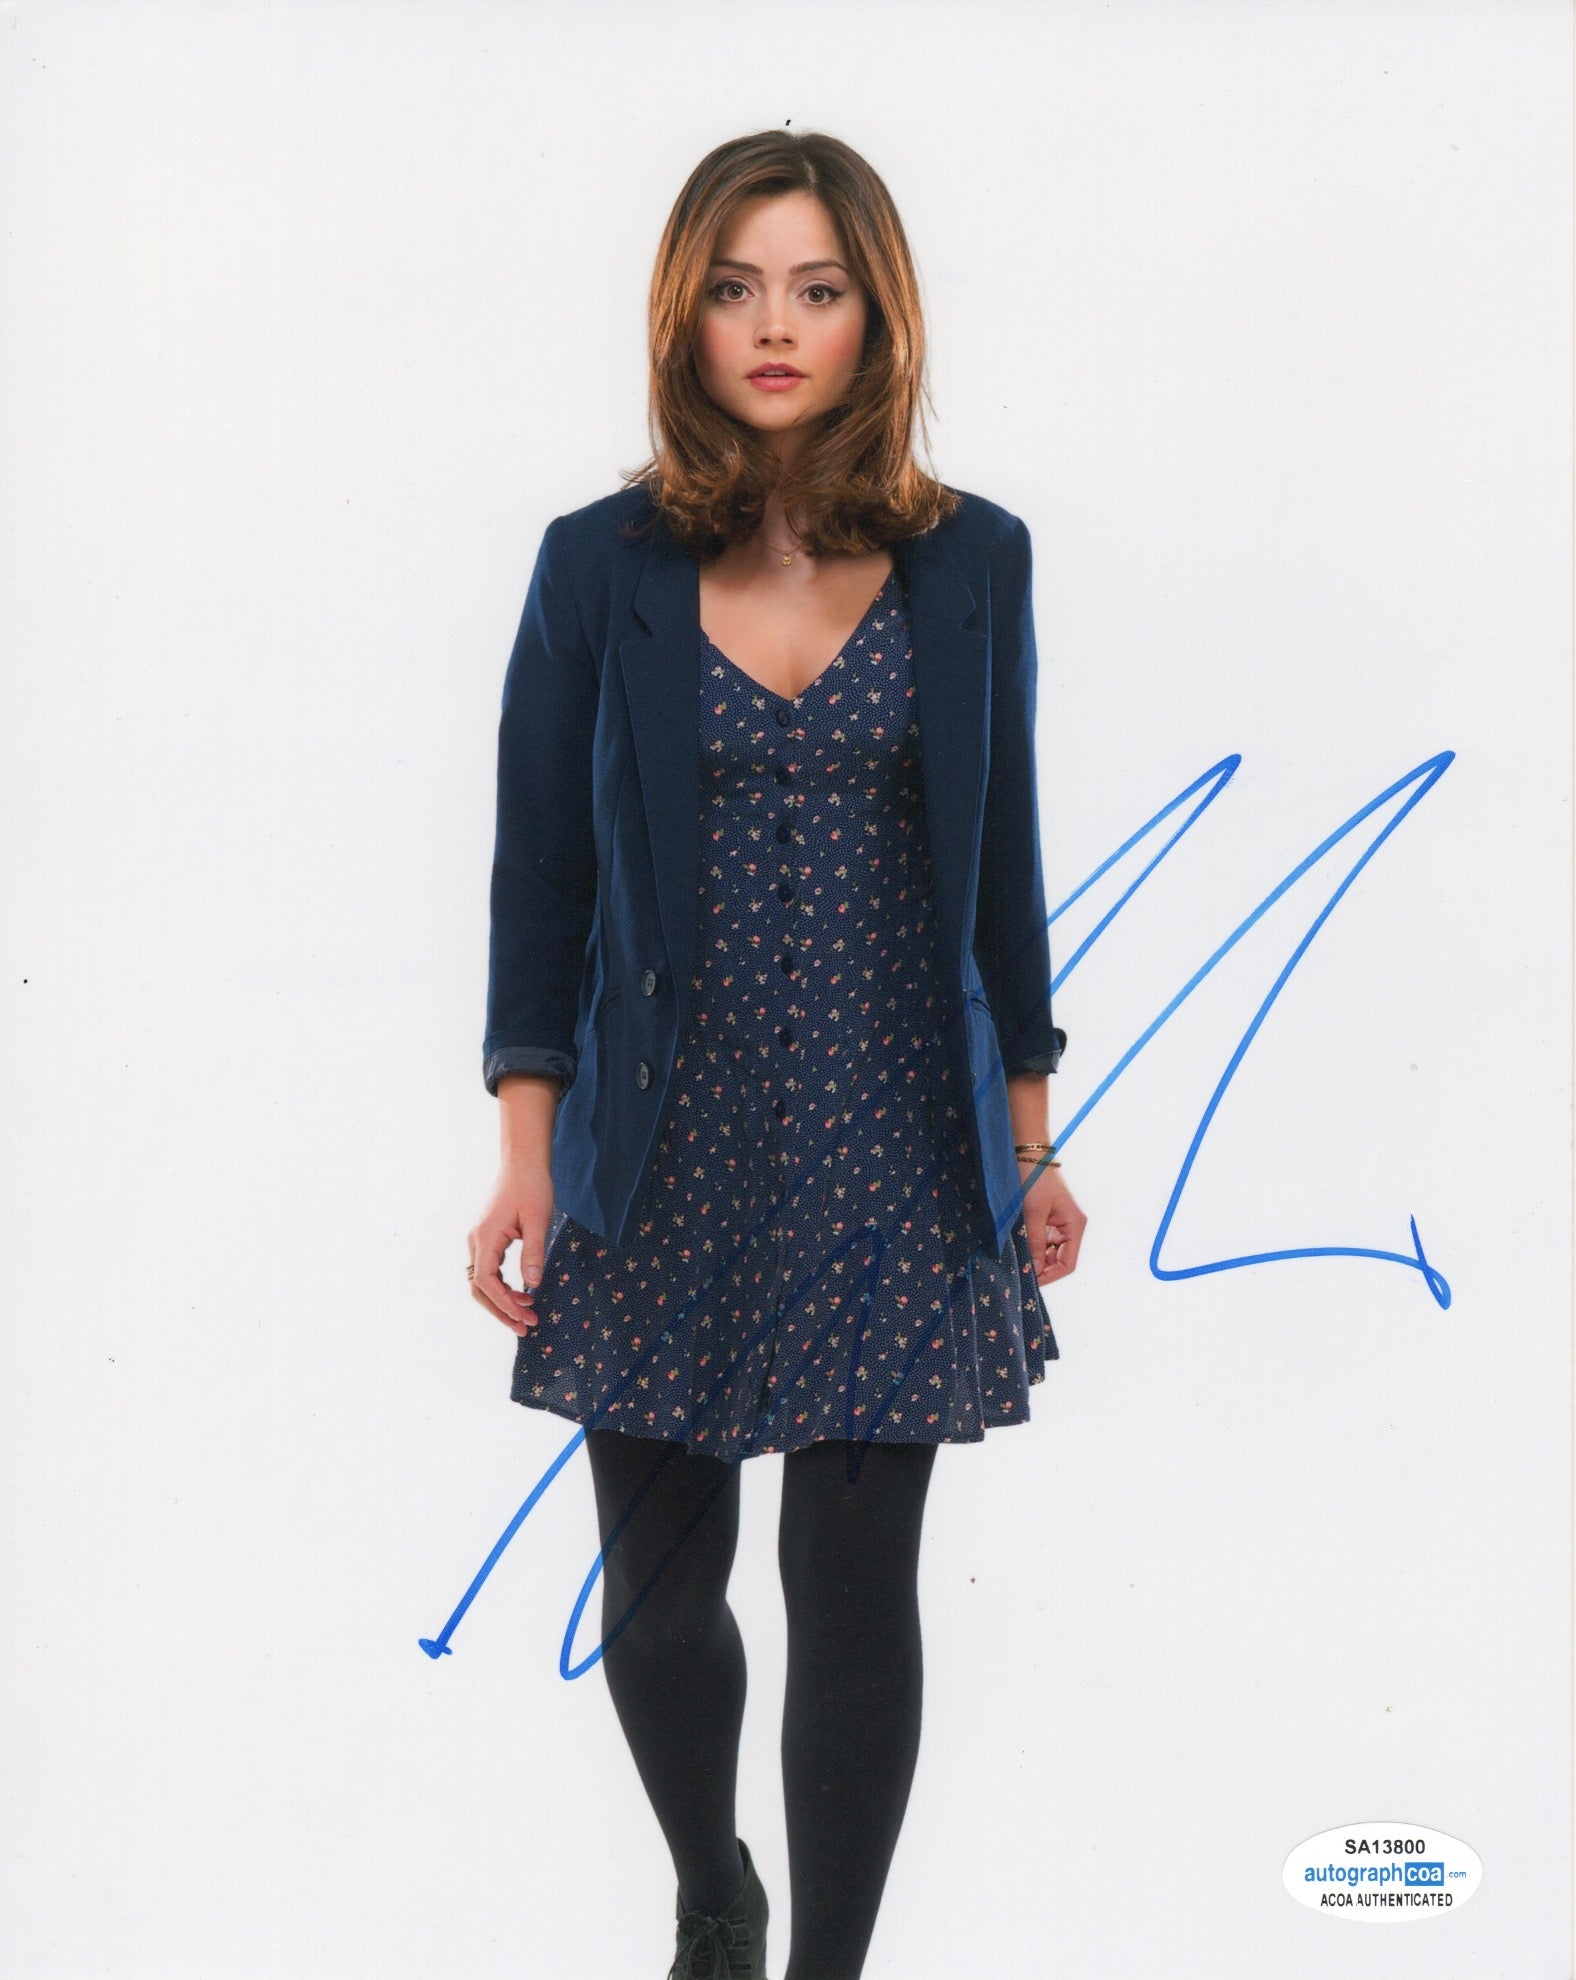 Jenna Louise Coleman Doctor Who Signed Autograph 8x10 Photo ACOA #2 - Outlaw Hobbies Authentic Autographs